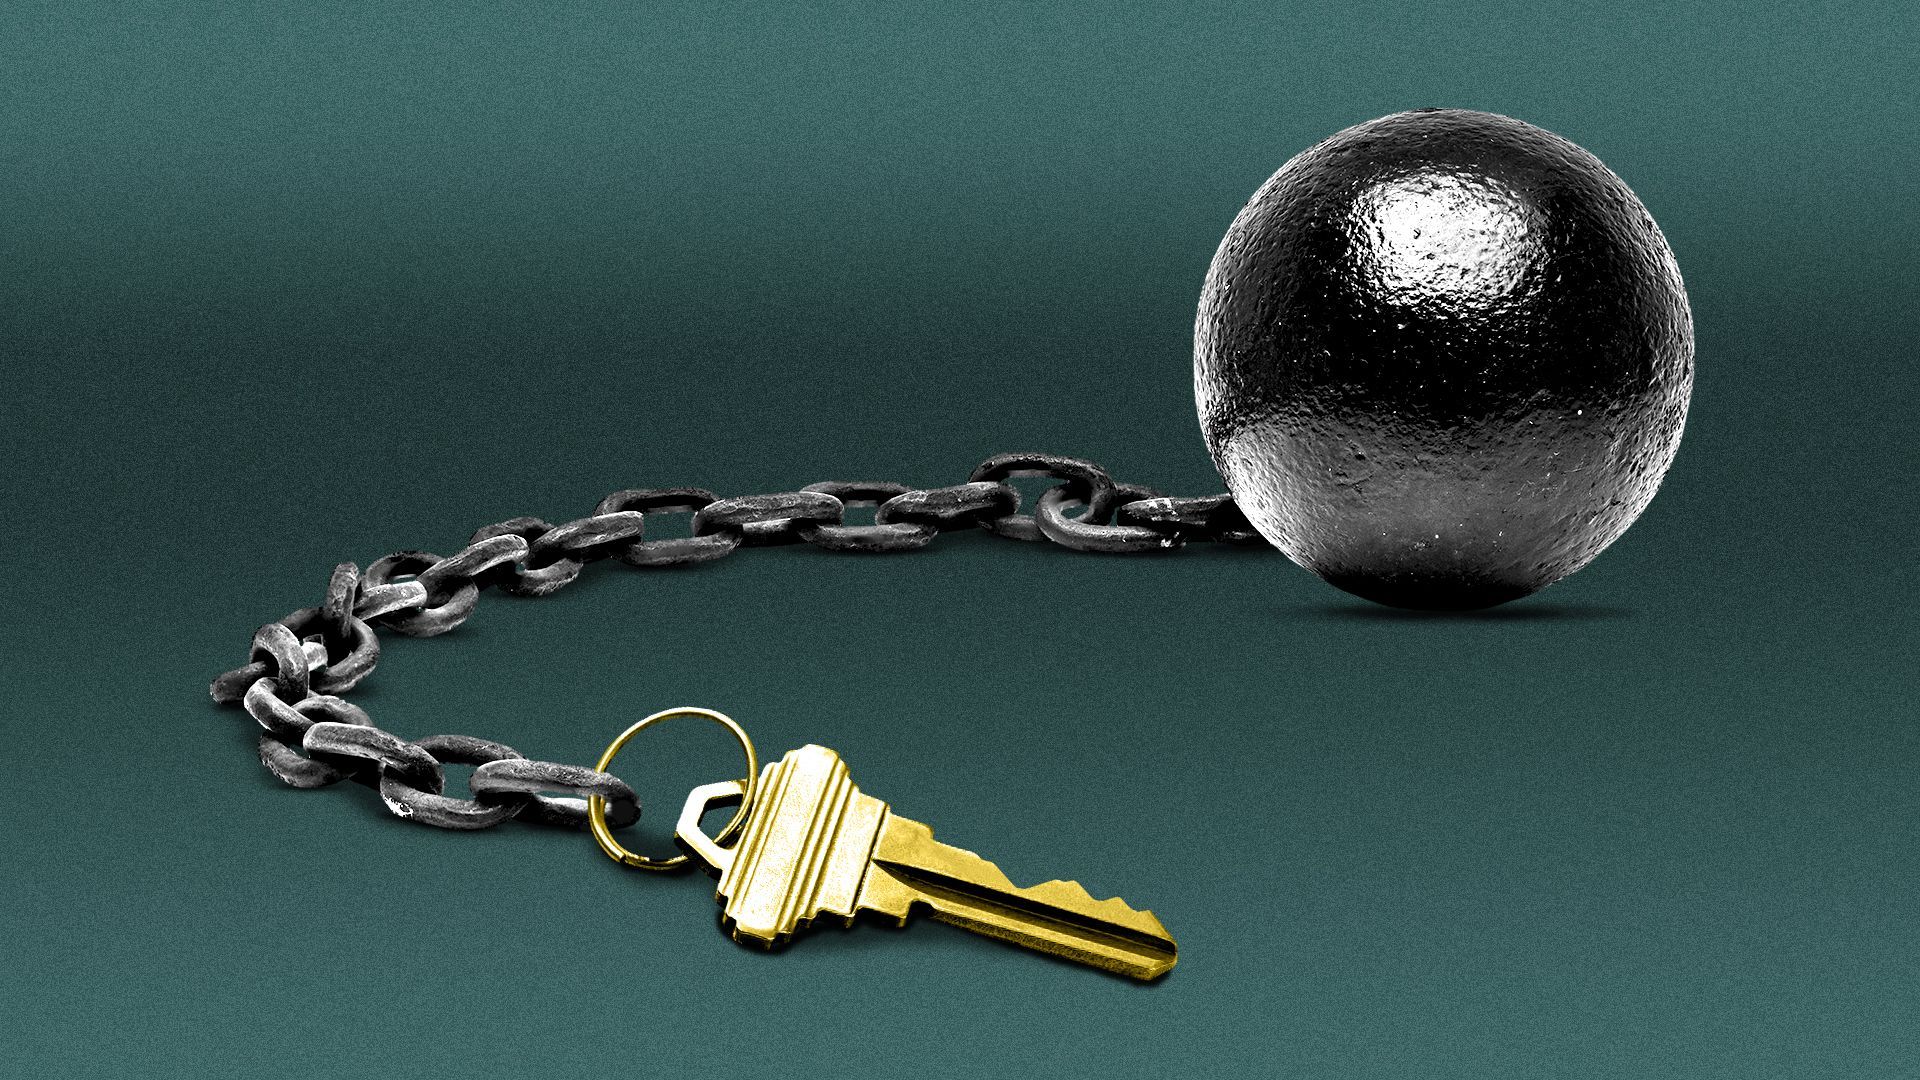 Illustration of a house key attached to a ball and chain.